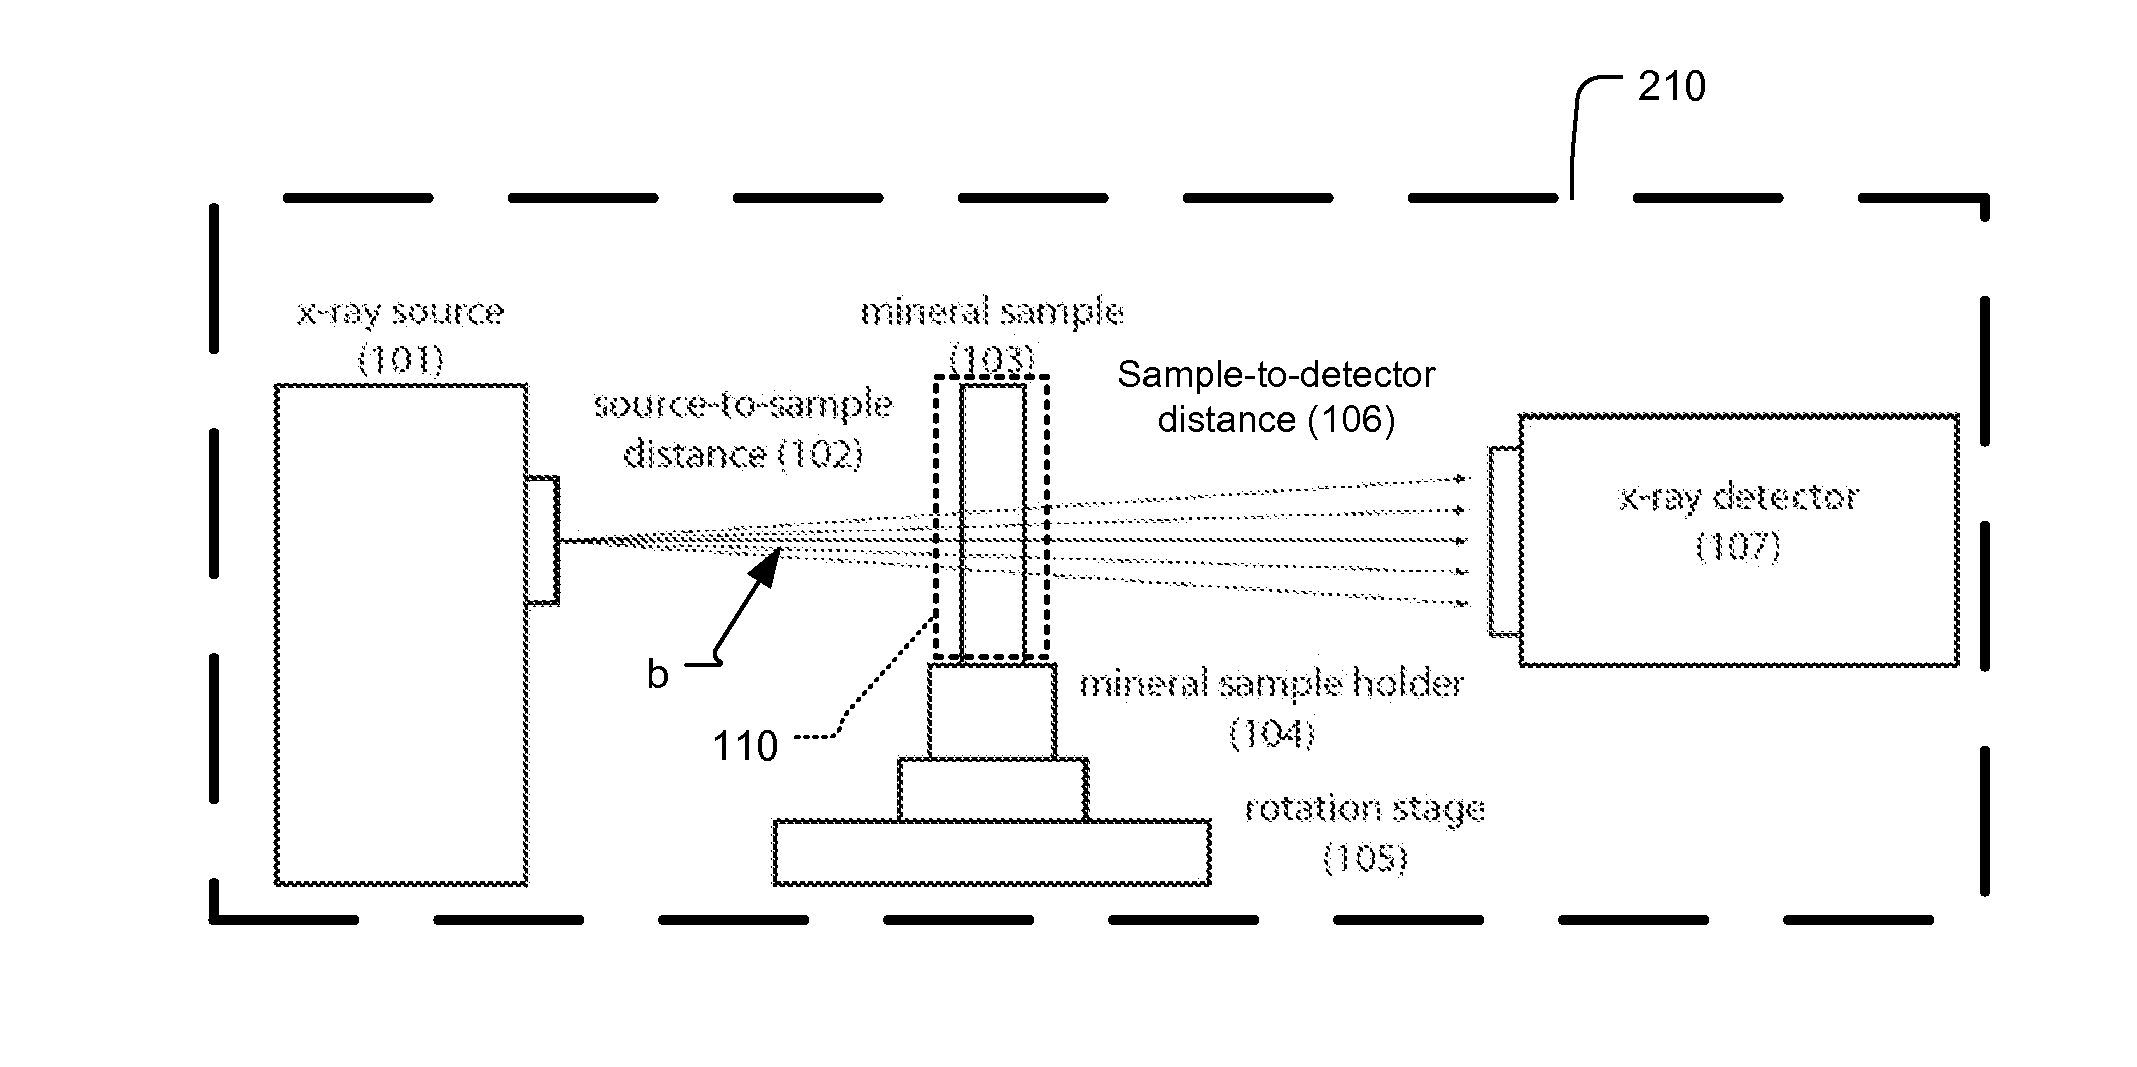 Process for examining mineral samples with X-ray microscope and projection systems